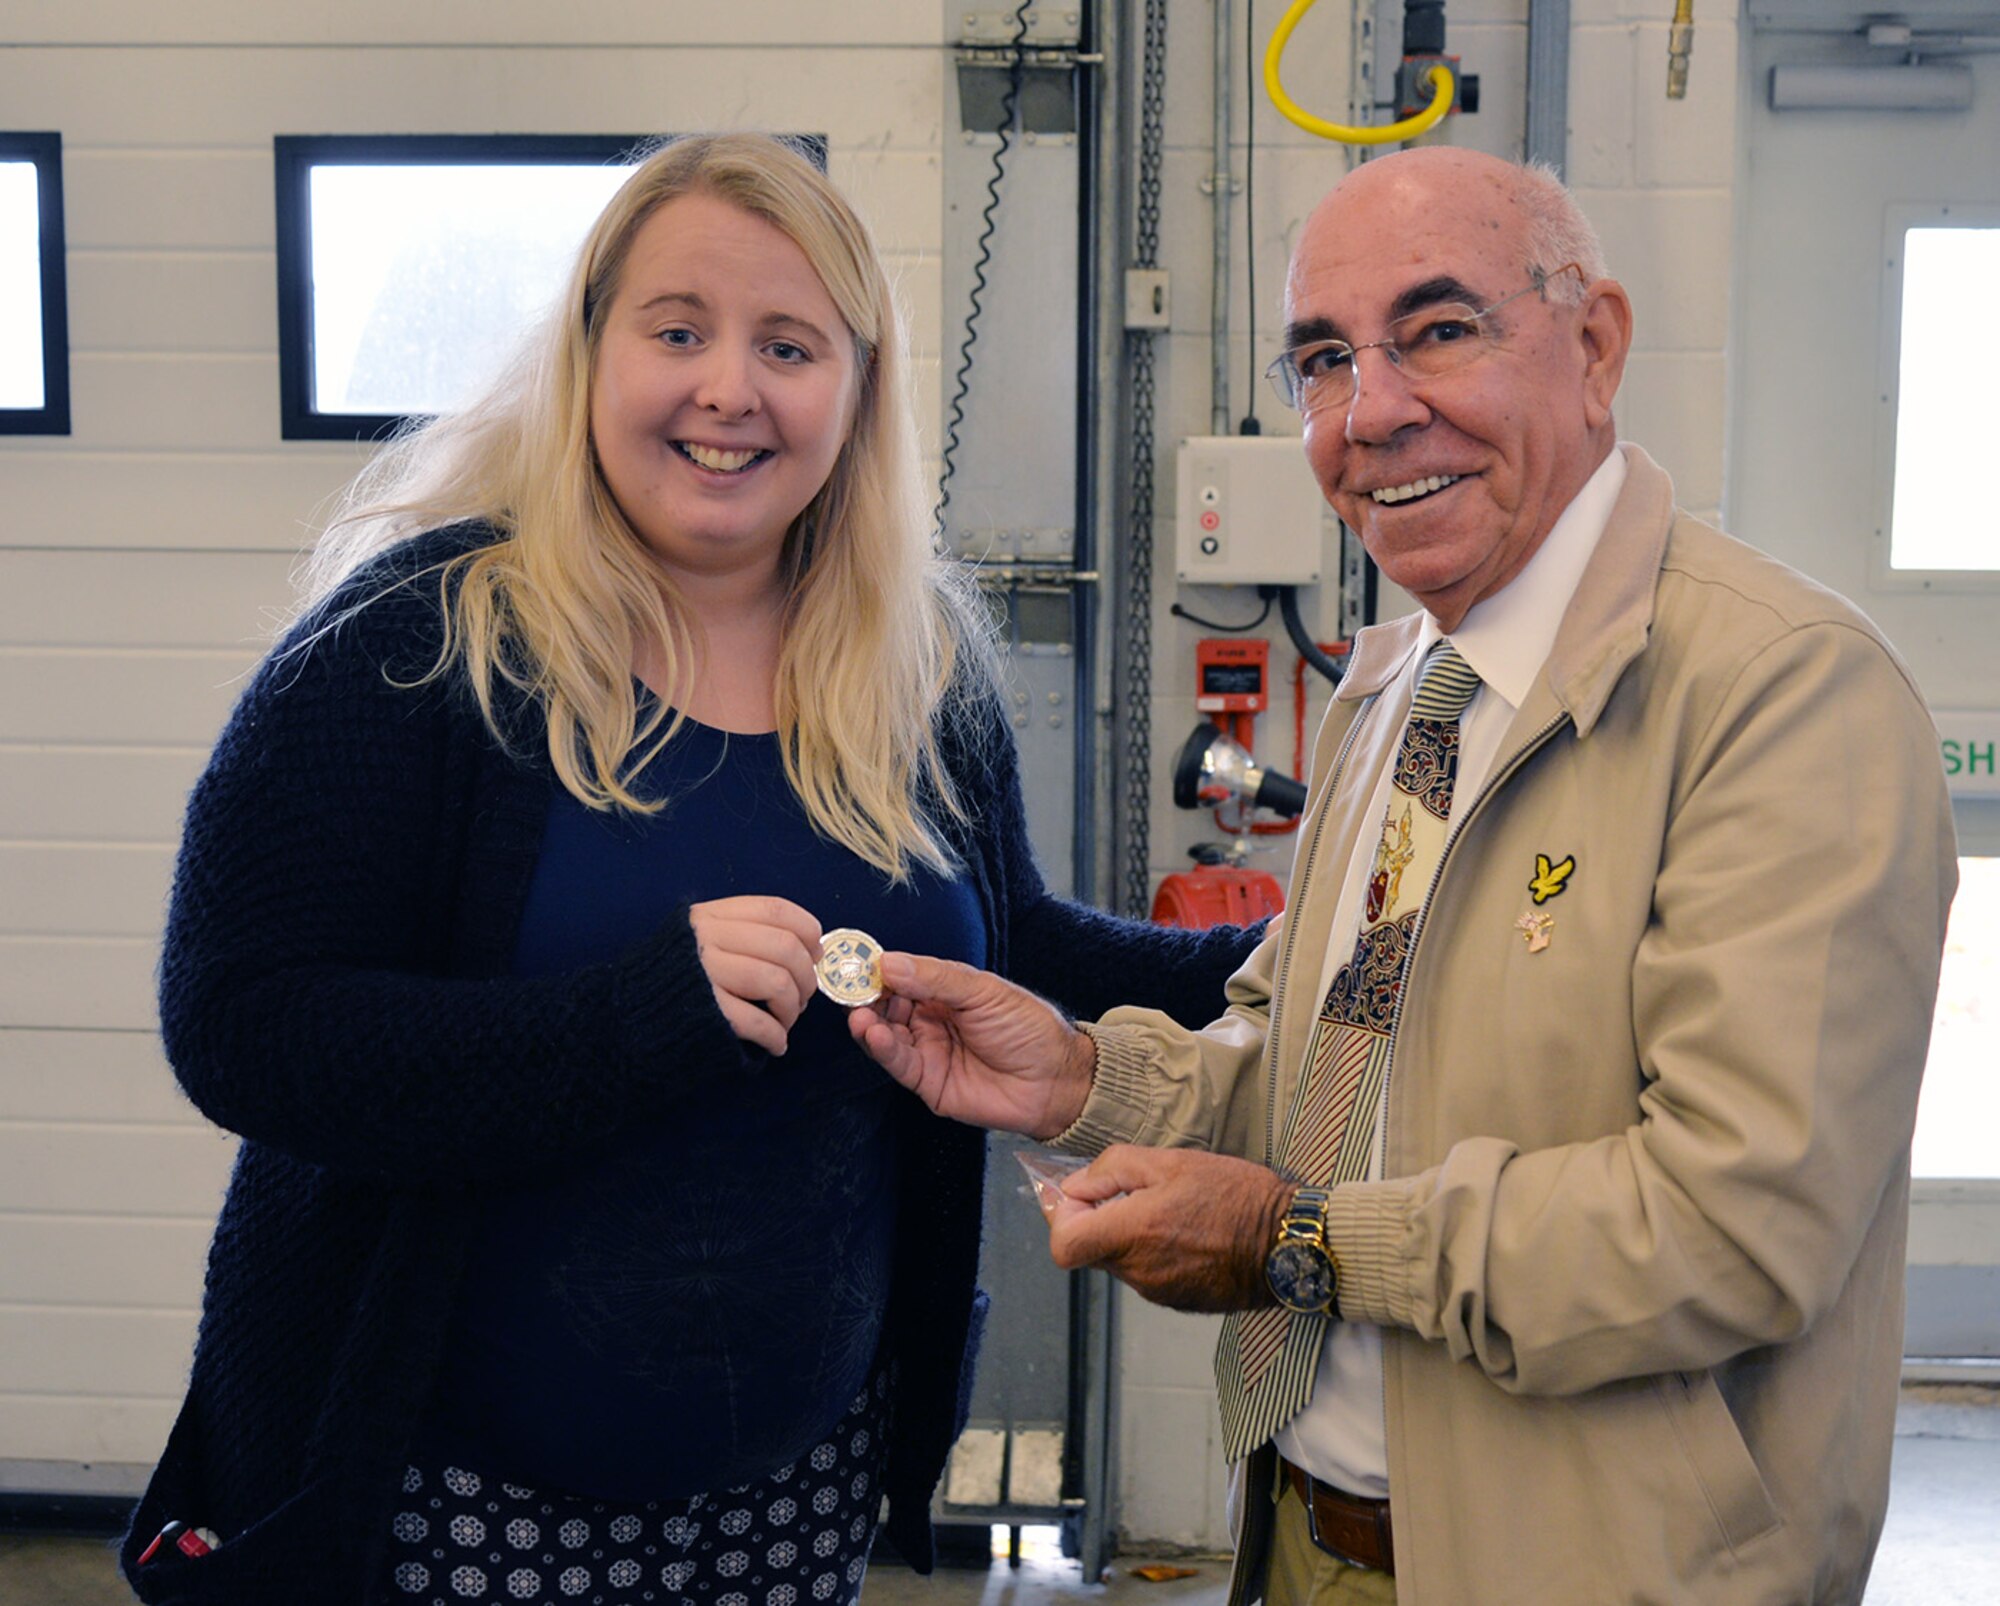 Ken Thompson, right, British-American Committee chairman, presents a BAC coin to Emma Joy-Staines, Steel Bones co-founder, at a Steel Bones event Oct. 24, 2016, on RAF Mildenhall, England. Joy-Staines and her husband, Leigh, began Steel Bones after Leigh’s leg was amputated and the family had difficulty finding support once he left the hospital. (U.S. Air Force photo by Karen Abeyasekere)